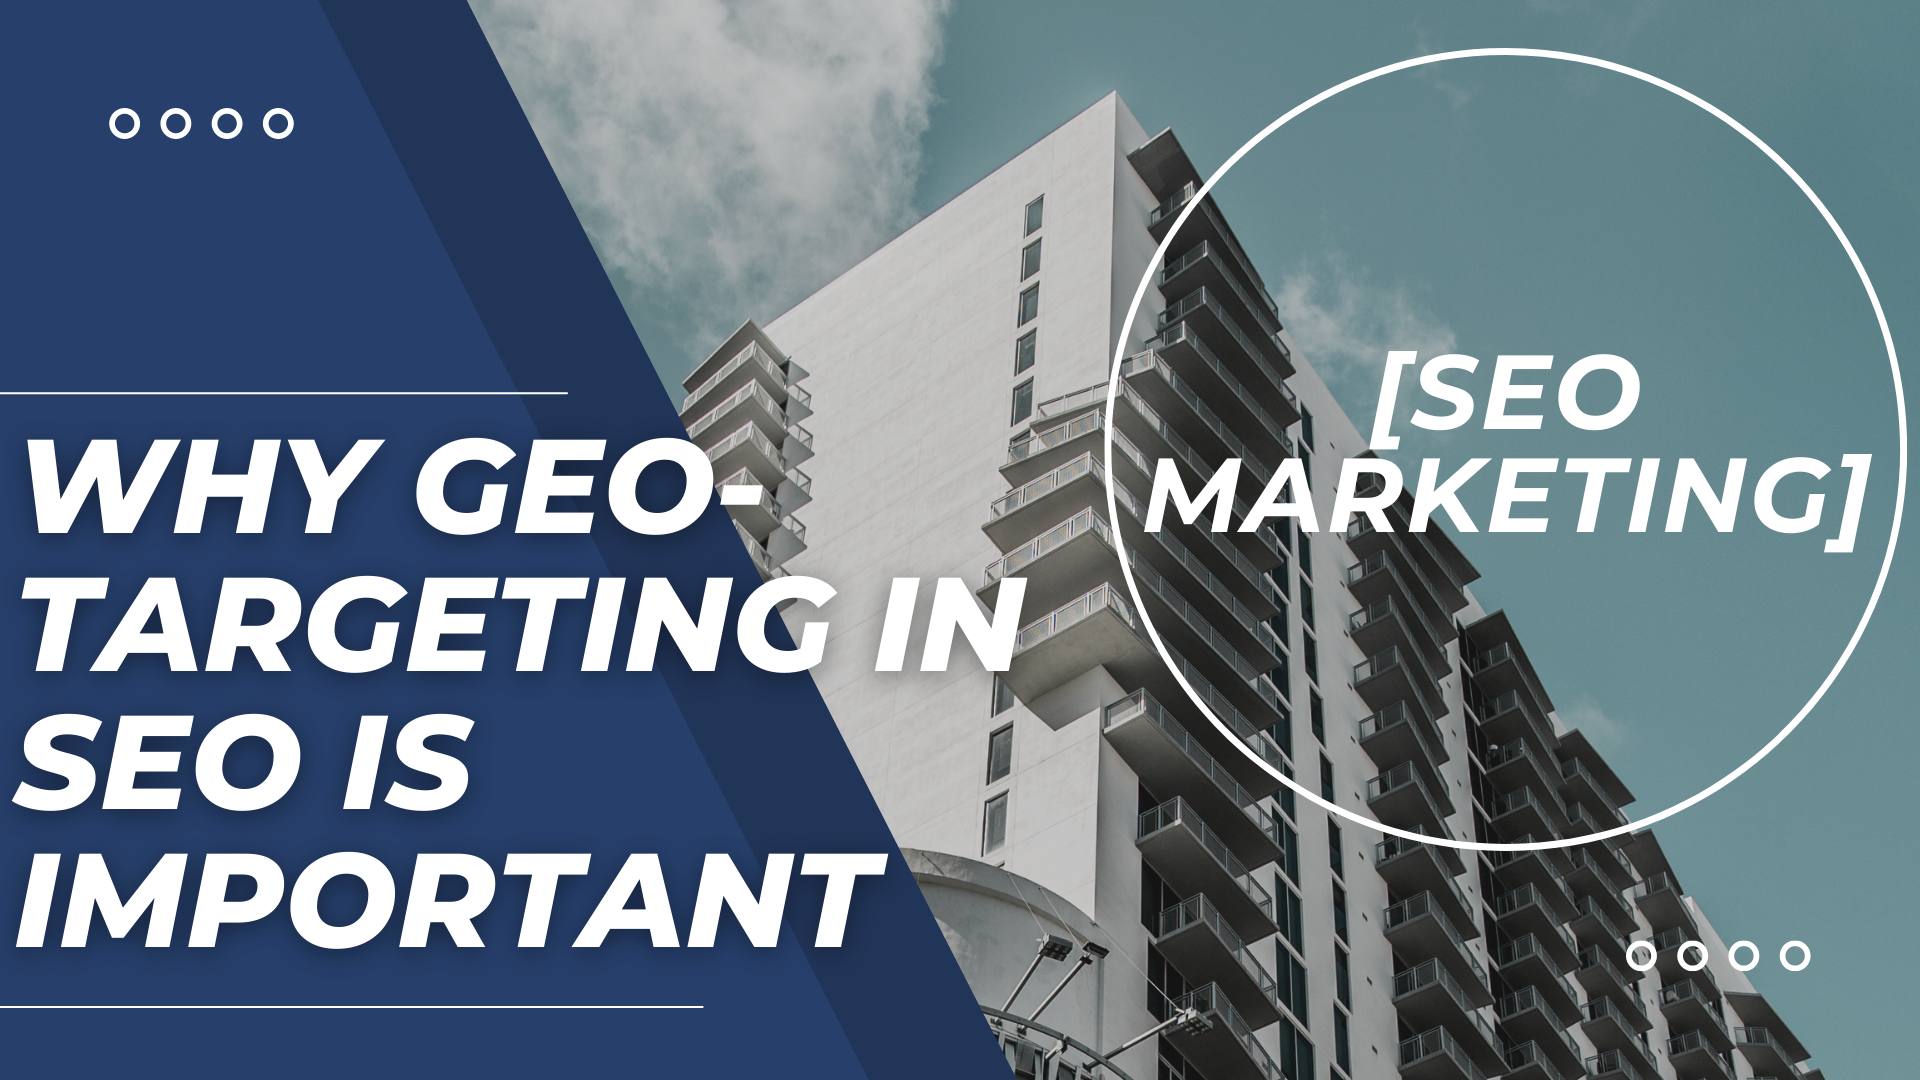 [SEO Marketing] Why Geo-Targeting in SEO is important